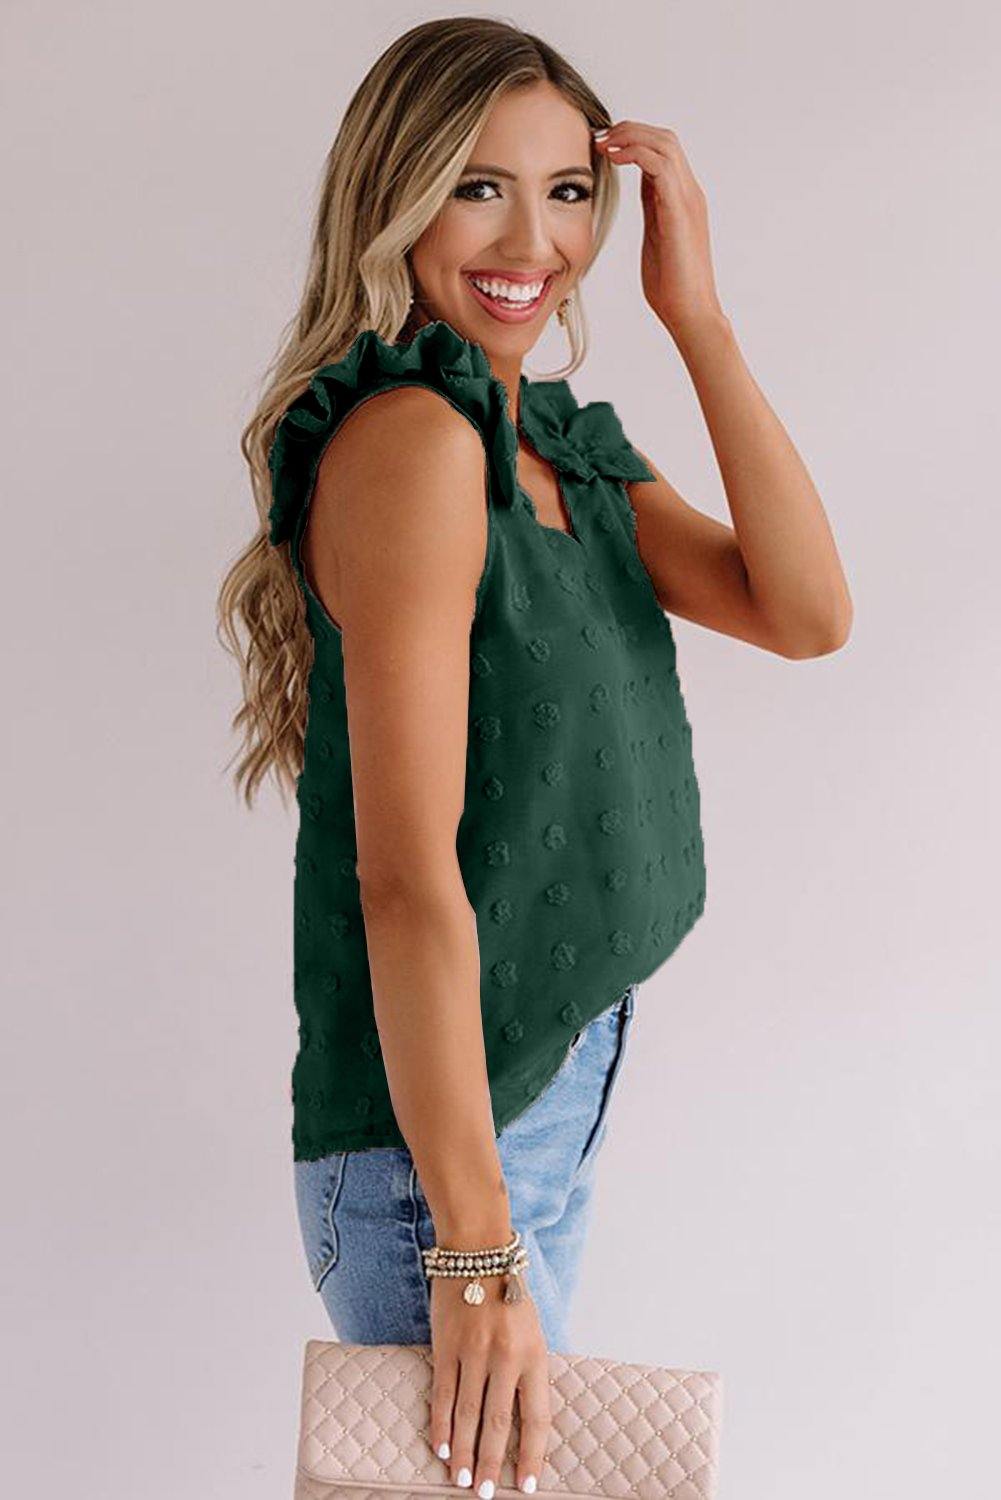 Swiss Dot Woven Sleeveless Top With Ruffled Straps - L & M Kee, LLC